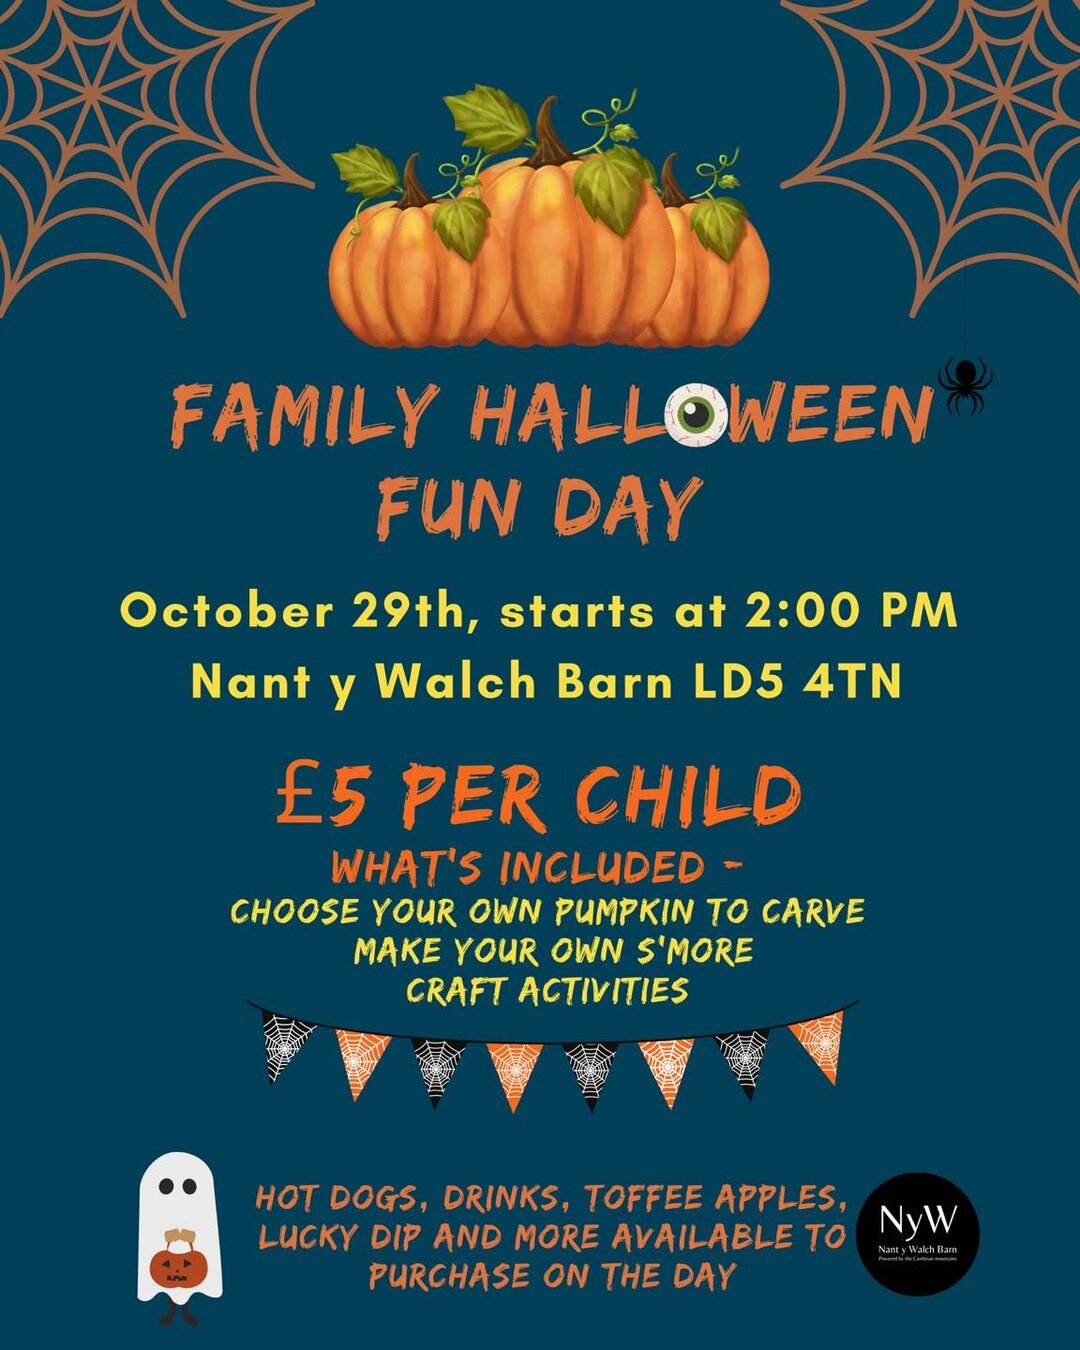 We had a great time on Friday sharing our Oktoberfest inspired menu at our Dining Club. 

Next up&hellip;

Halloween! We will be hosting a family Halloween fun day! For just &pound;5, each child will get their own pumpkin carving kit, a pumpkin 🎃 to